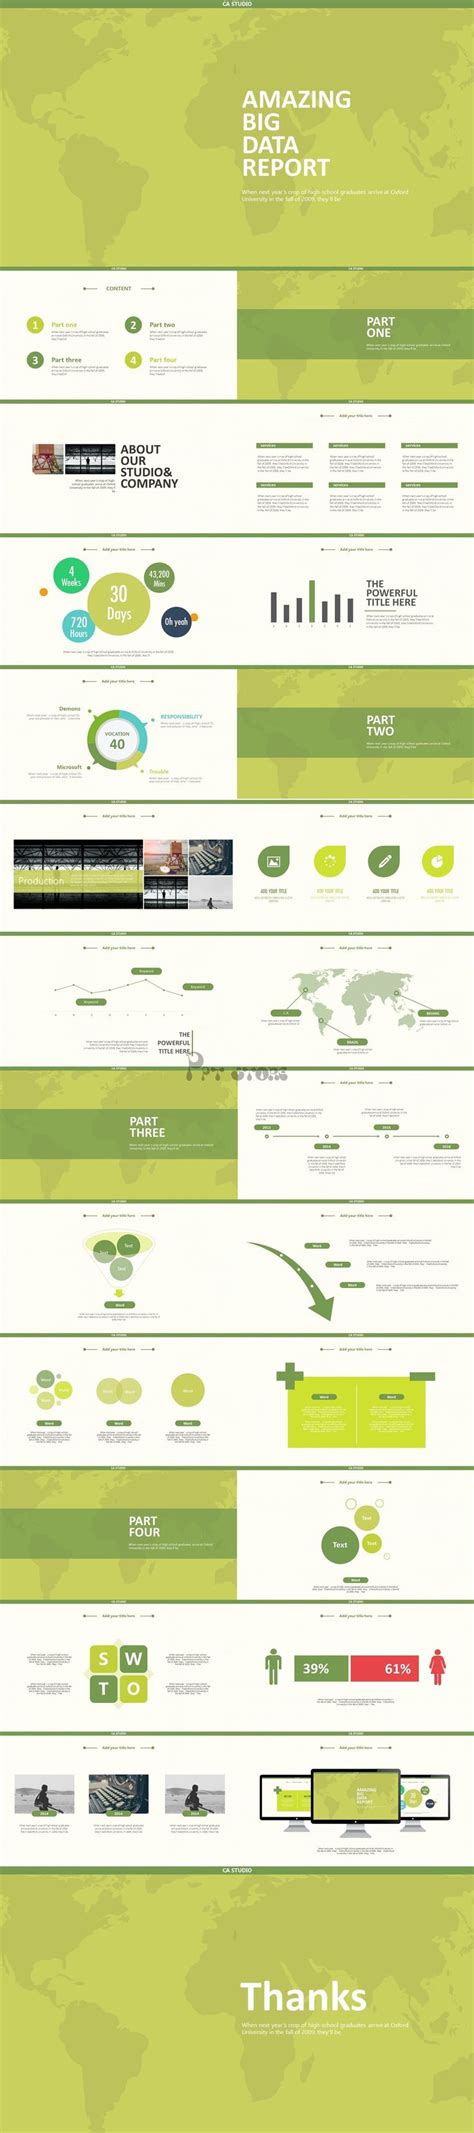 An Image Of A Green And White Web Page With Many Different Elements On